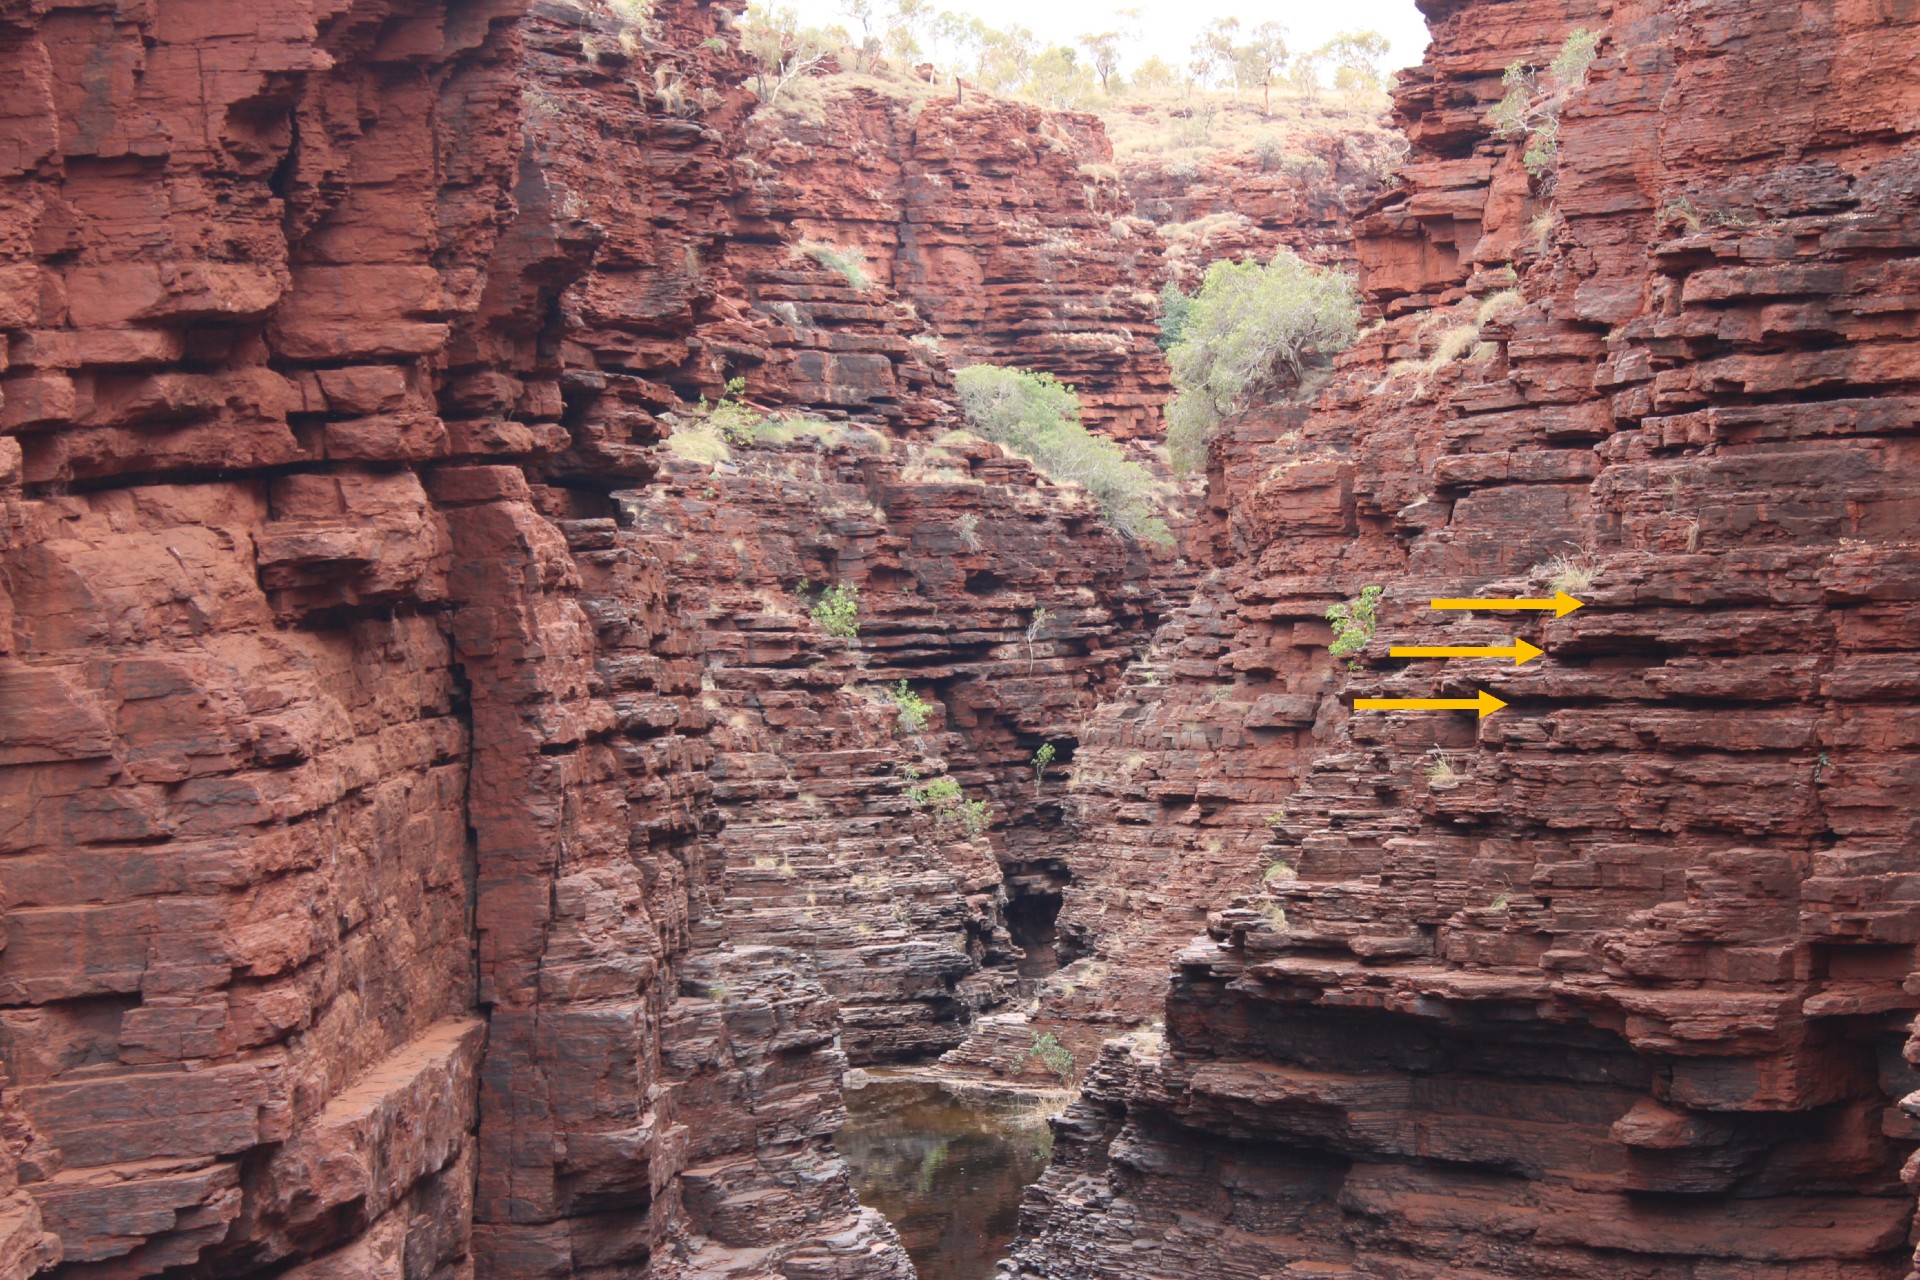 Joffre Gorge in Karijini National Park in Western Australia, showing regular alternations between harder reddish-brown rock and softer clay-rich rock (indicated by arrows) with an average thickness of 85 cm.  These alternations are attributed to past climate changes induced by variations in the eccentricity of the Earth's orbit.